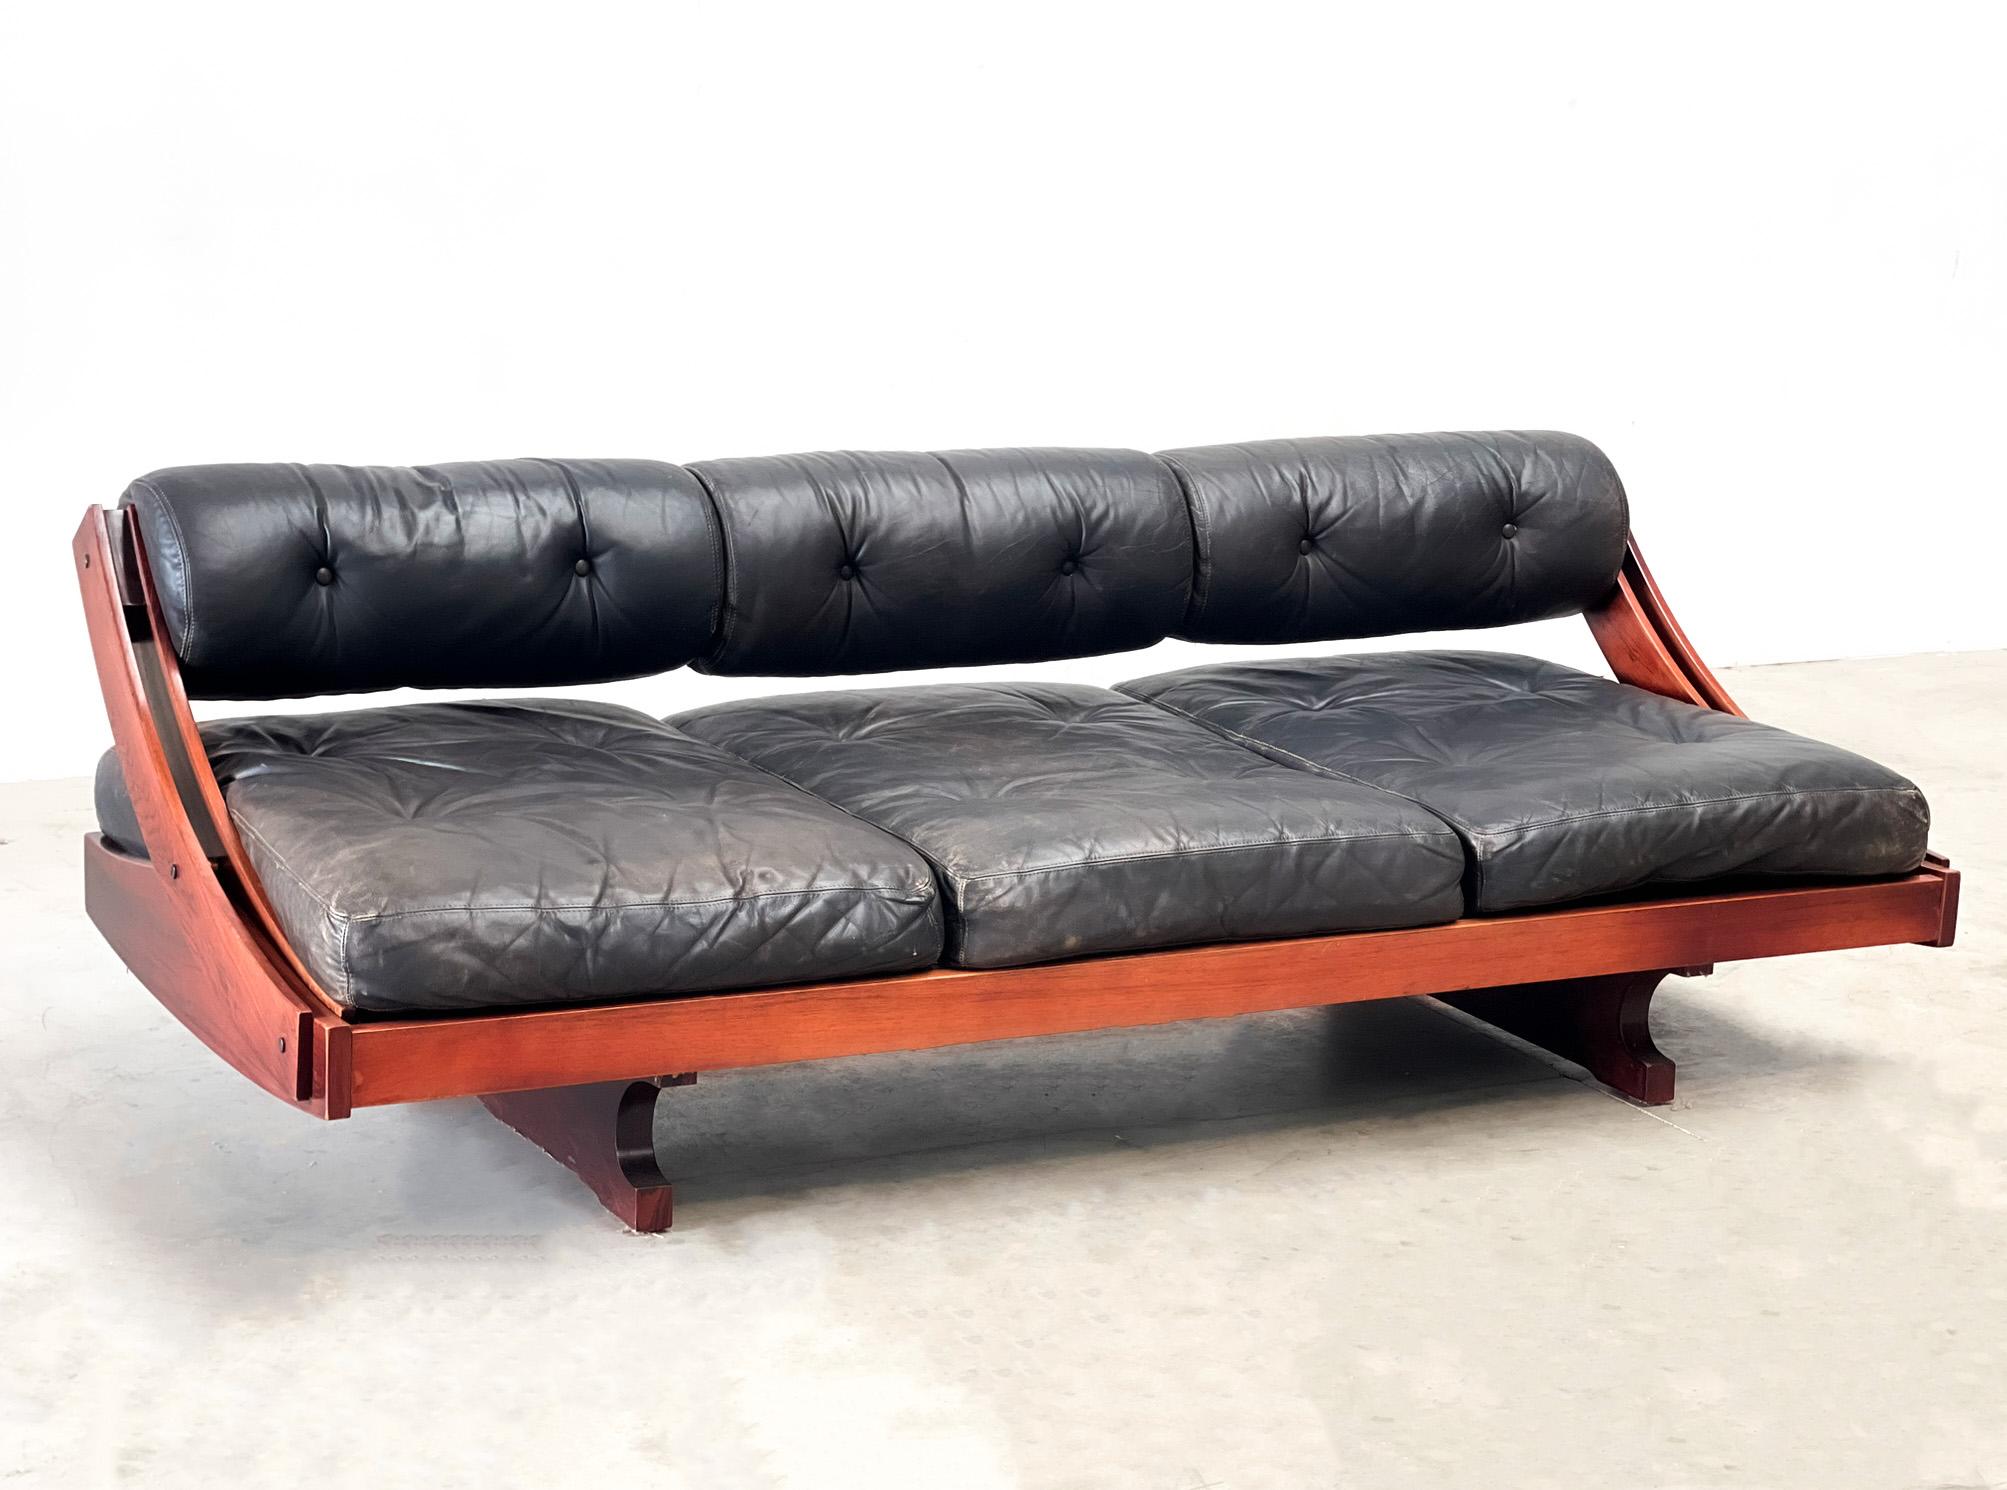 GS195 black leather sofa or daybed by Gianni Songia In Good Condition In Nijlen, VAN